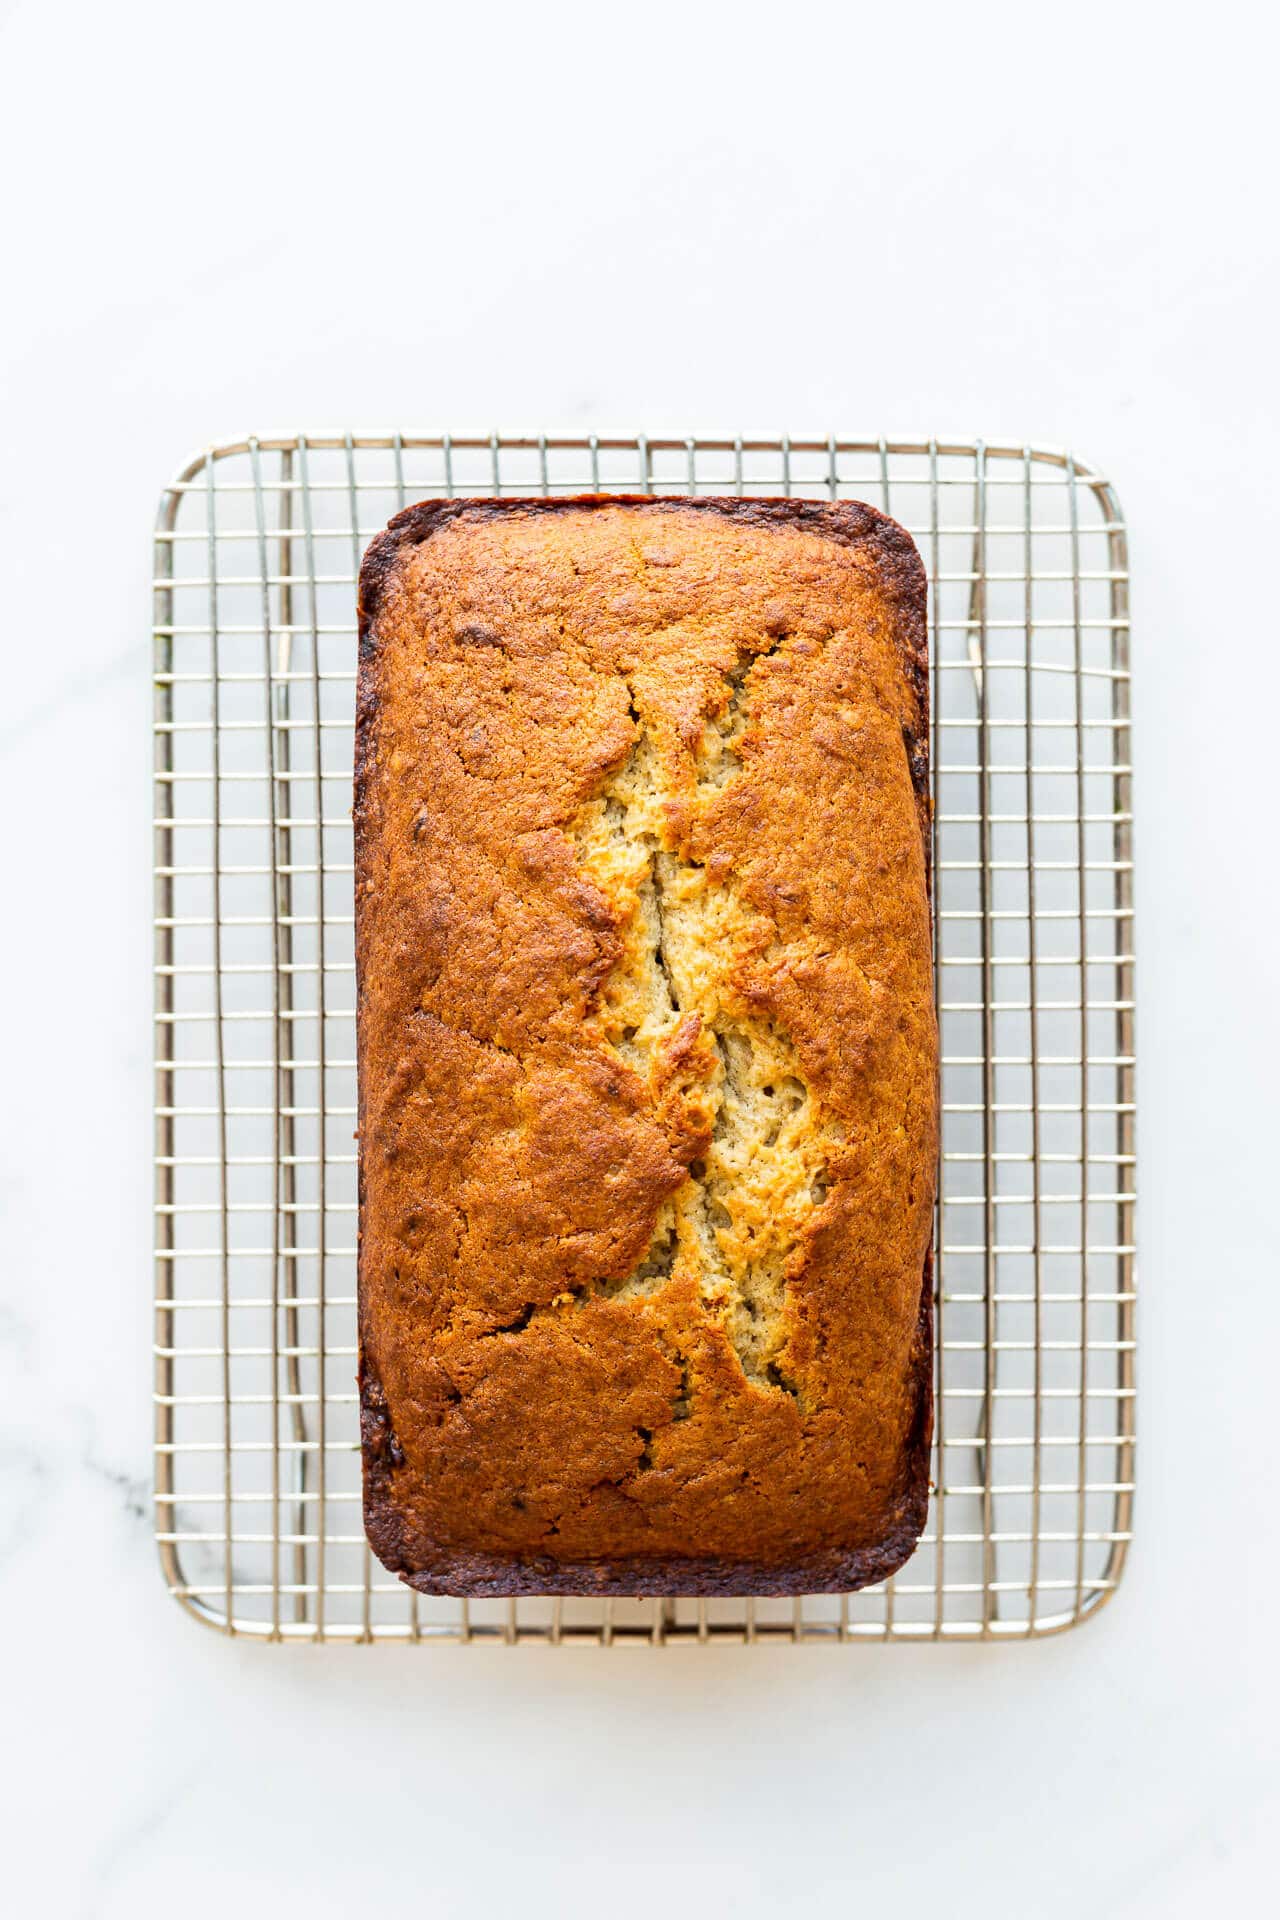 Golden brown banana bread on a vintage wire cooling rack